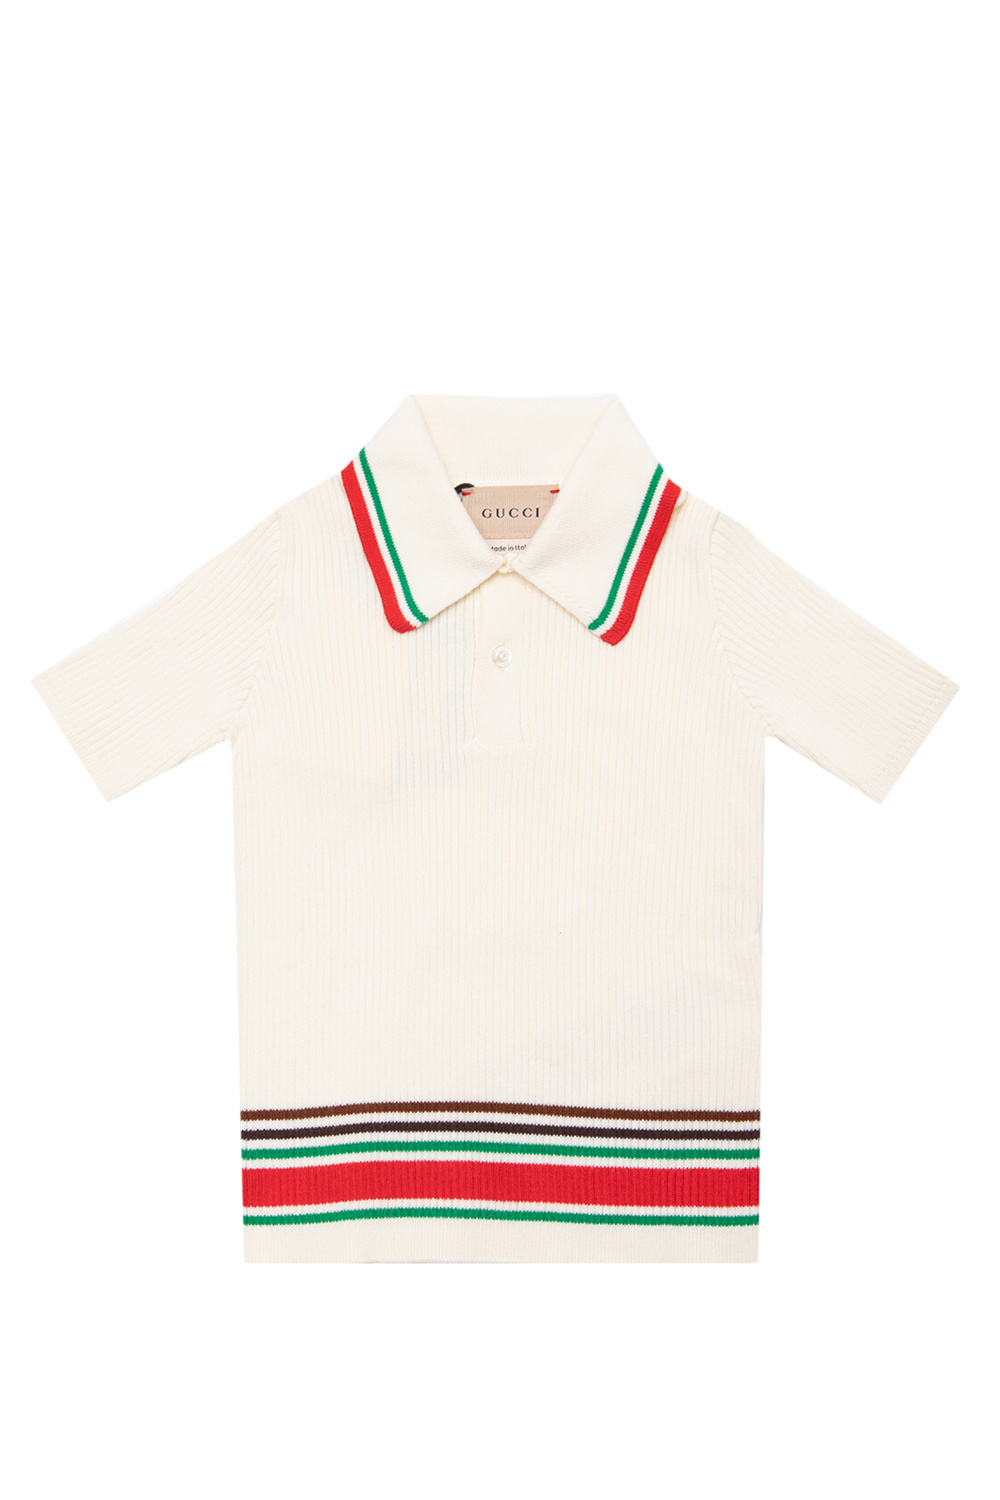 Gucci Kids Polo shirt with short sleeves